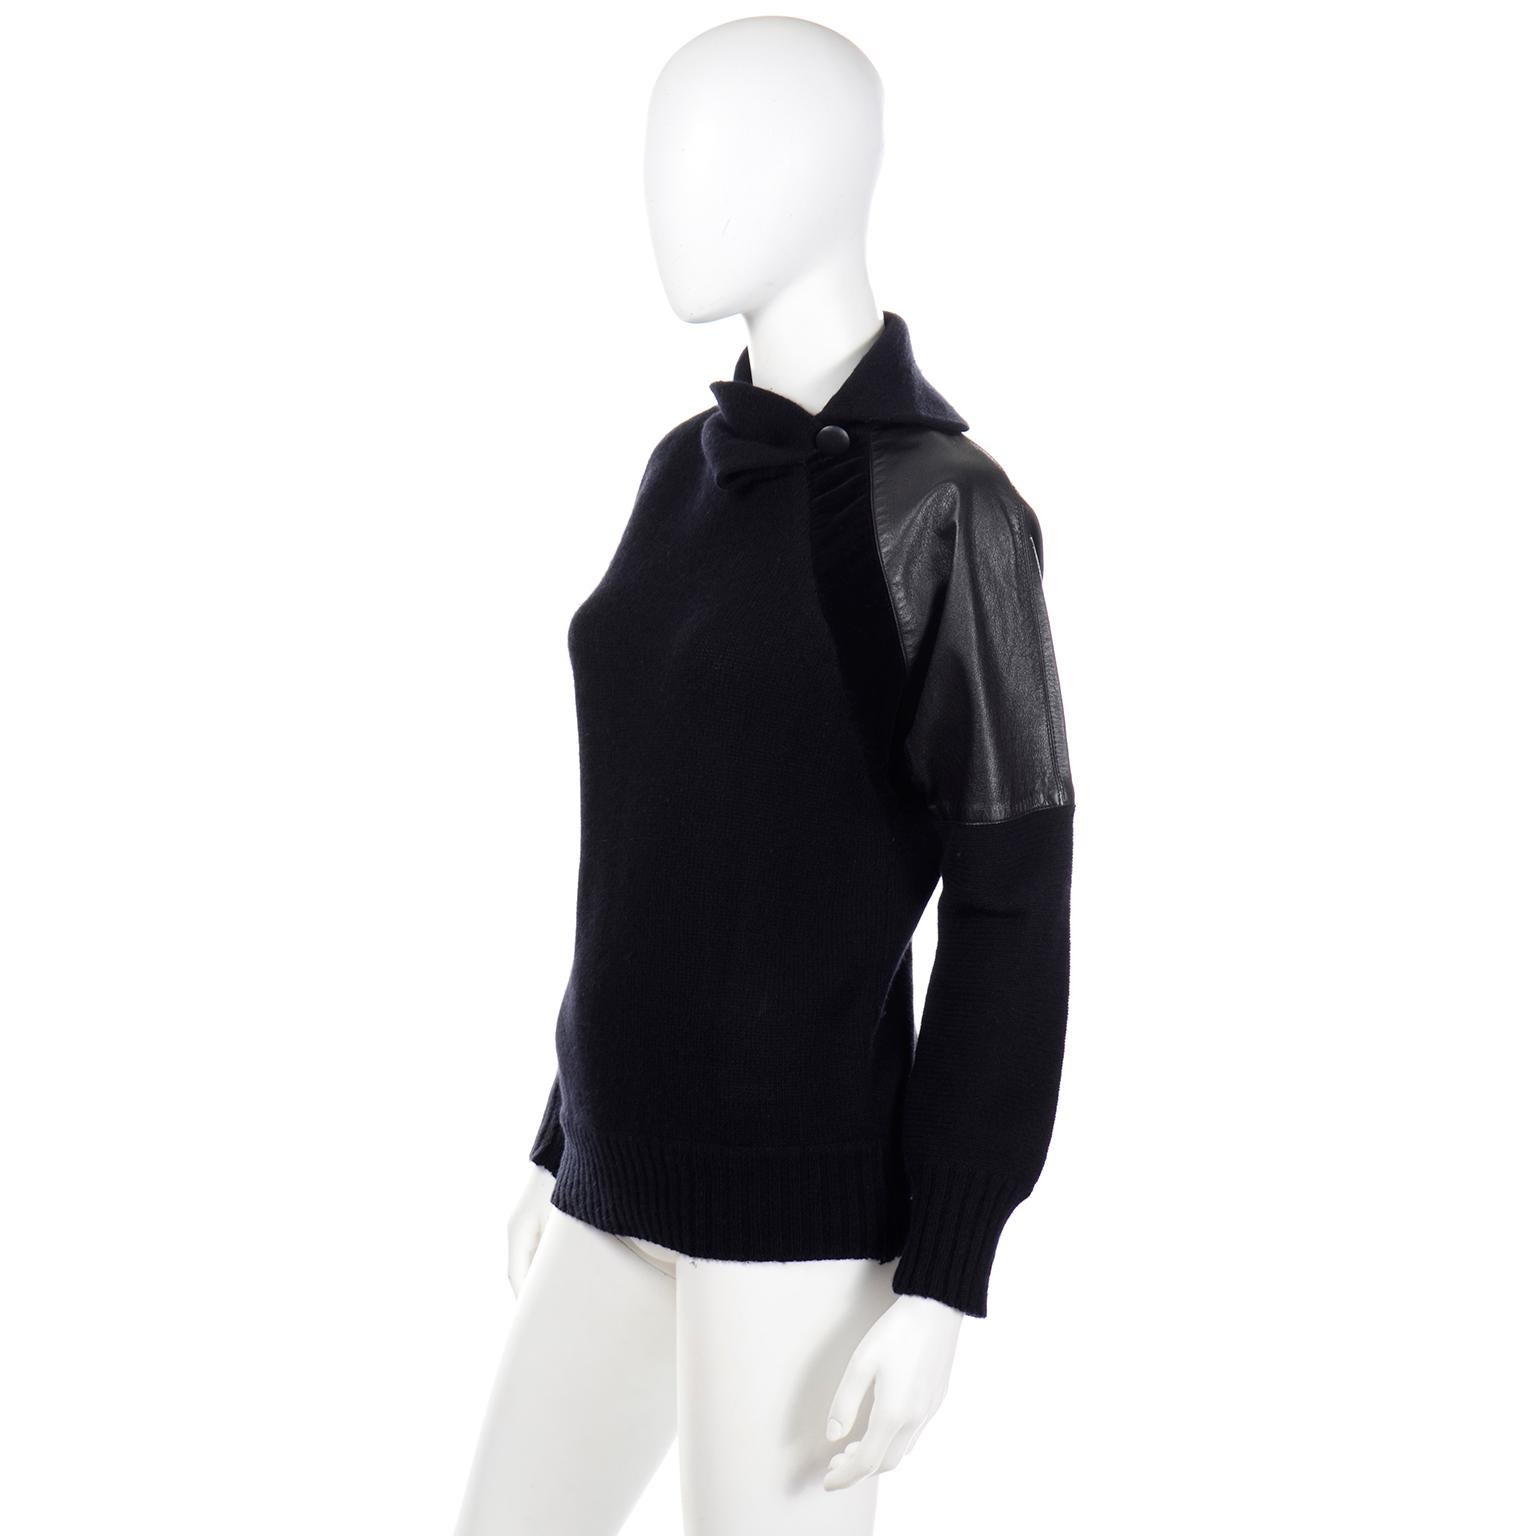 Gianfranco Ferre Vintage Black Wool and Leather Sweater Top 1